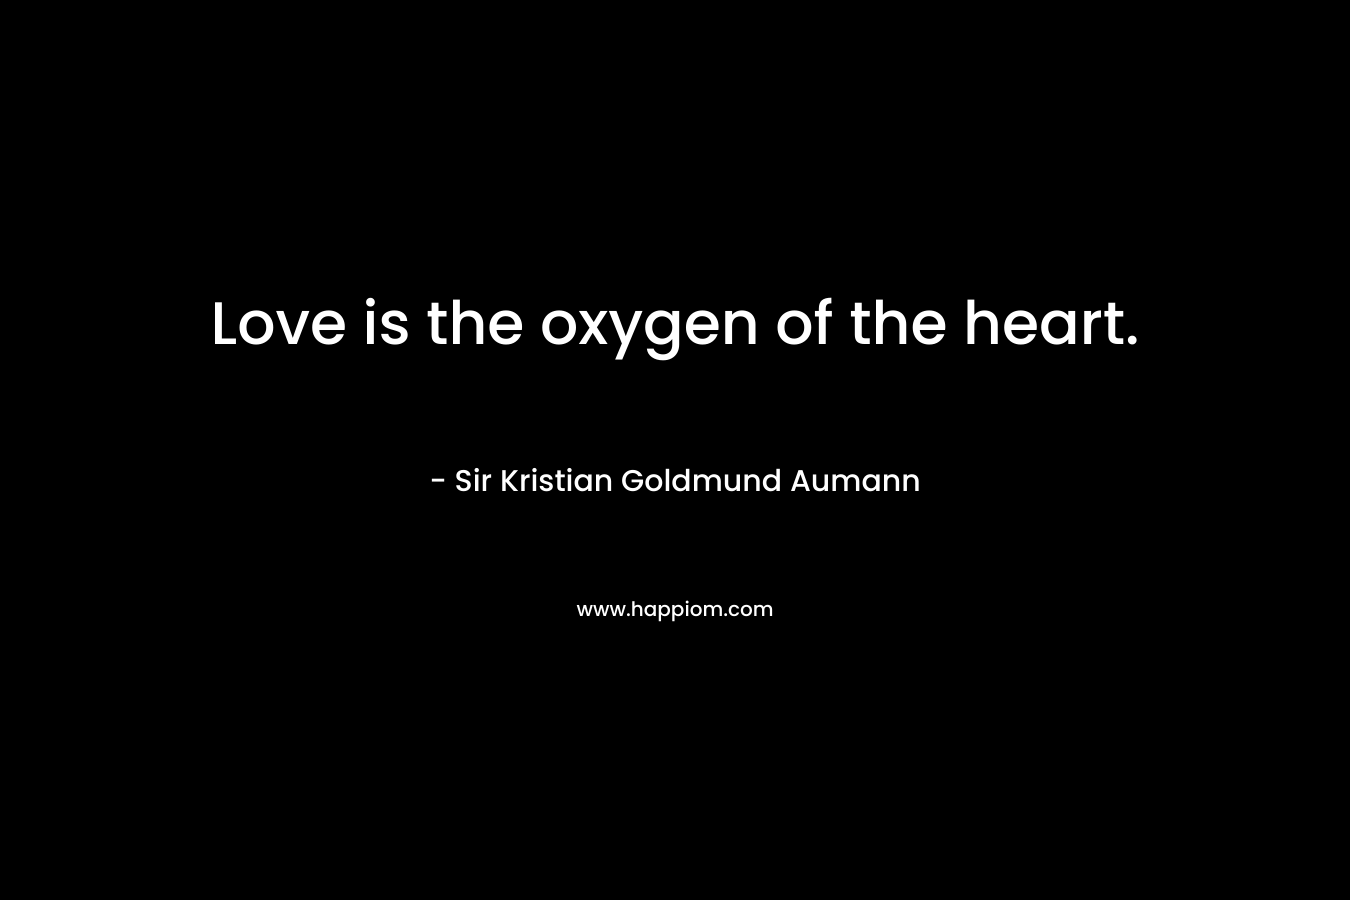 Love is the oxygen of the heart.